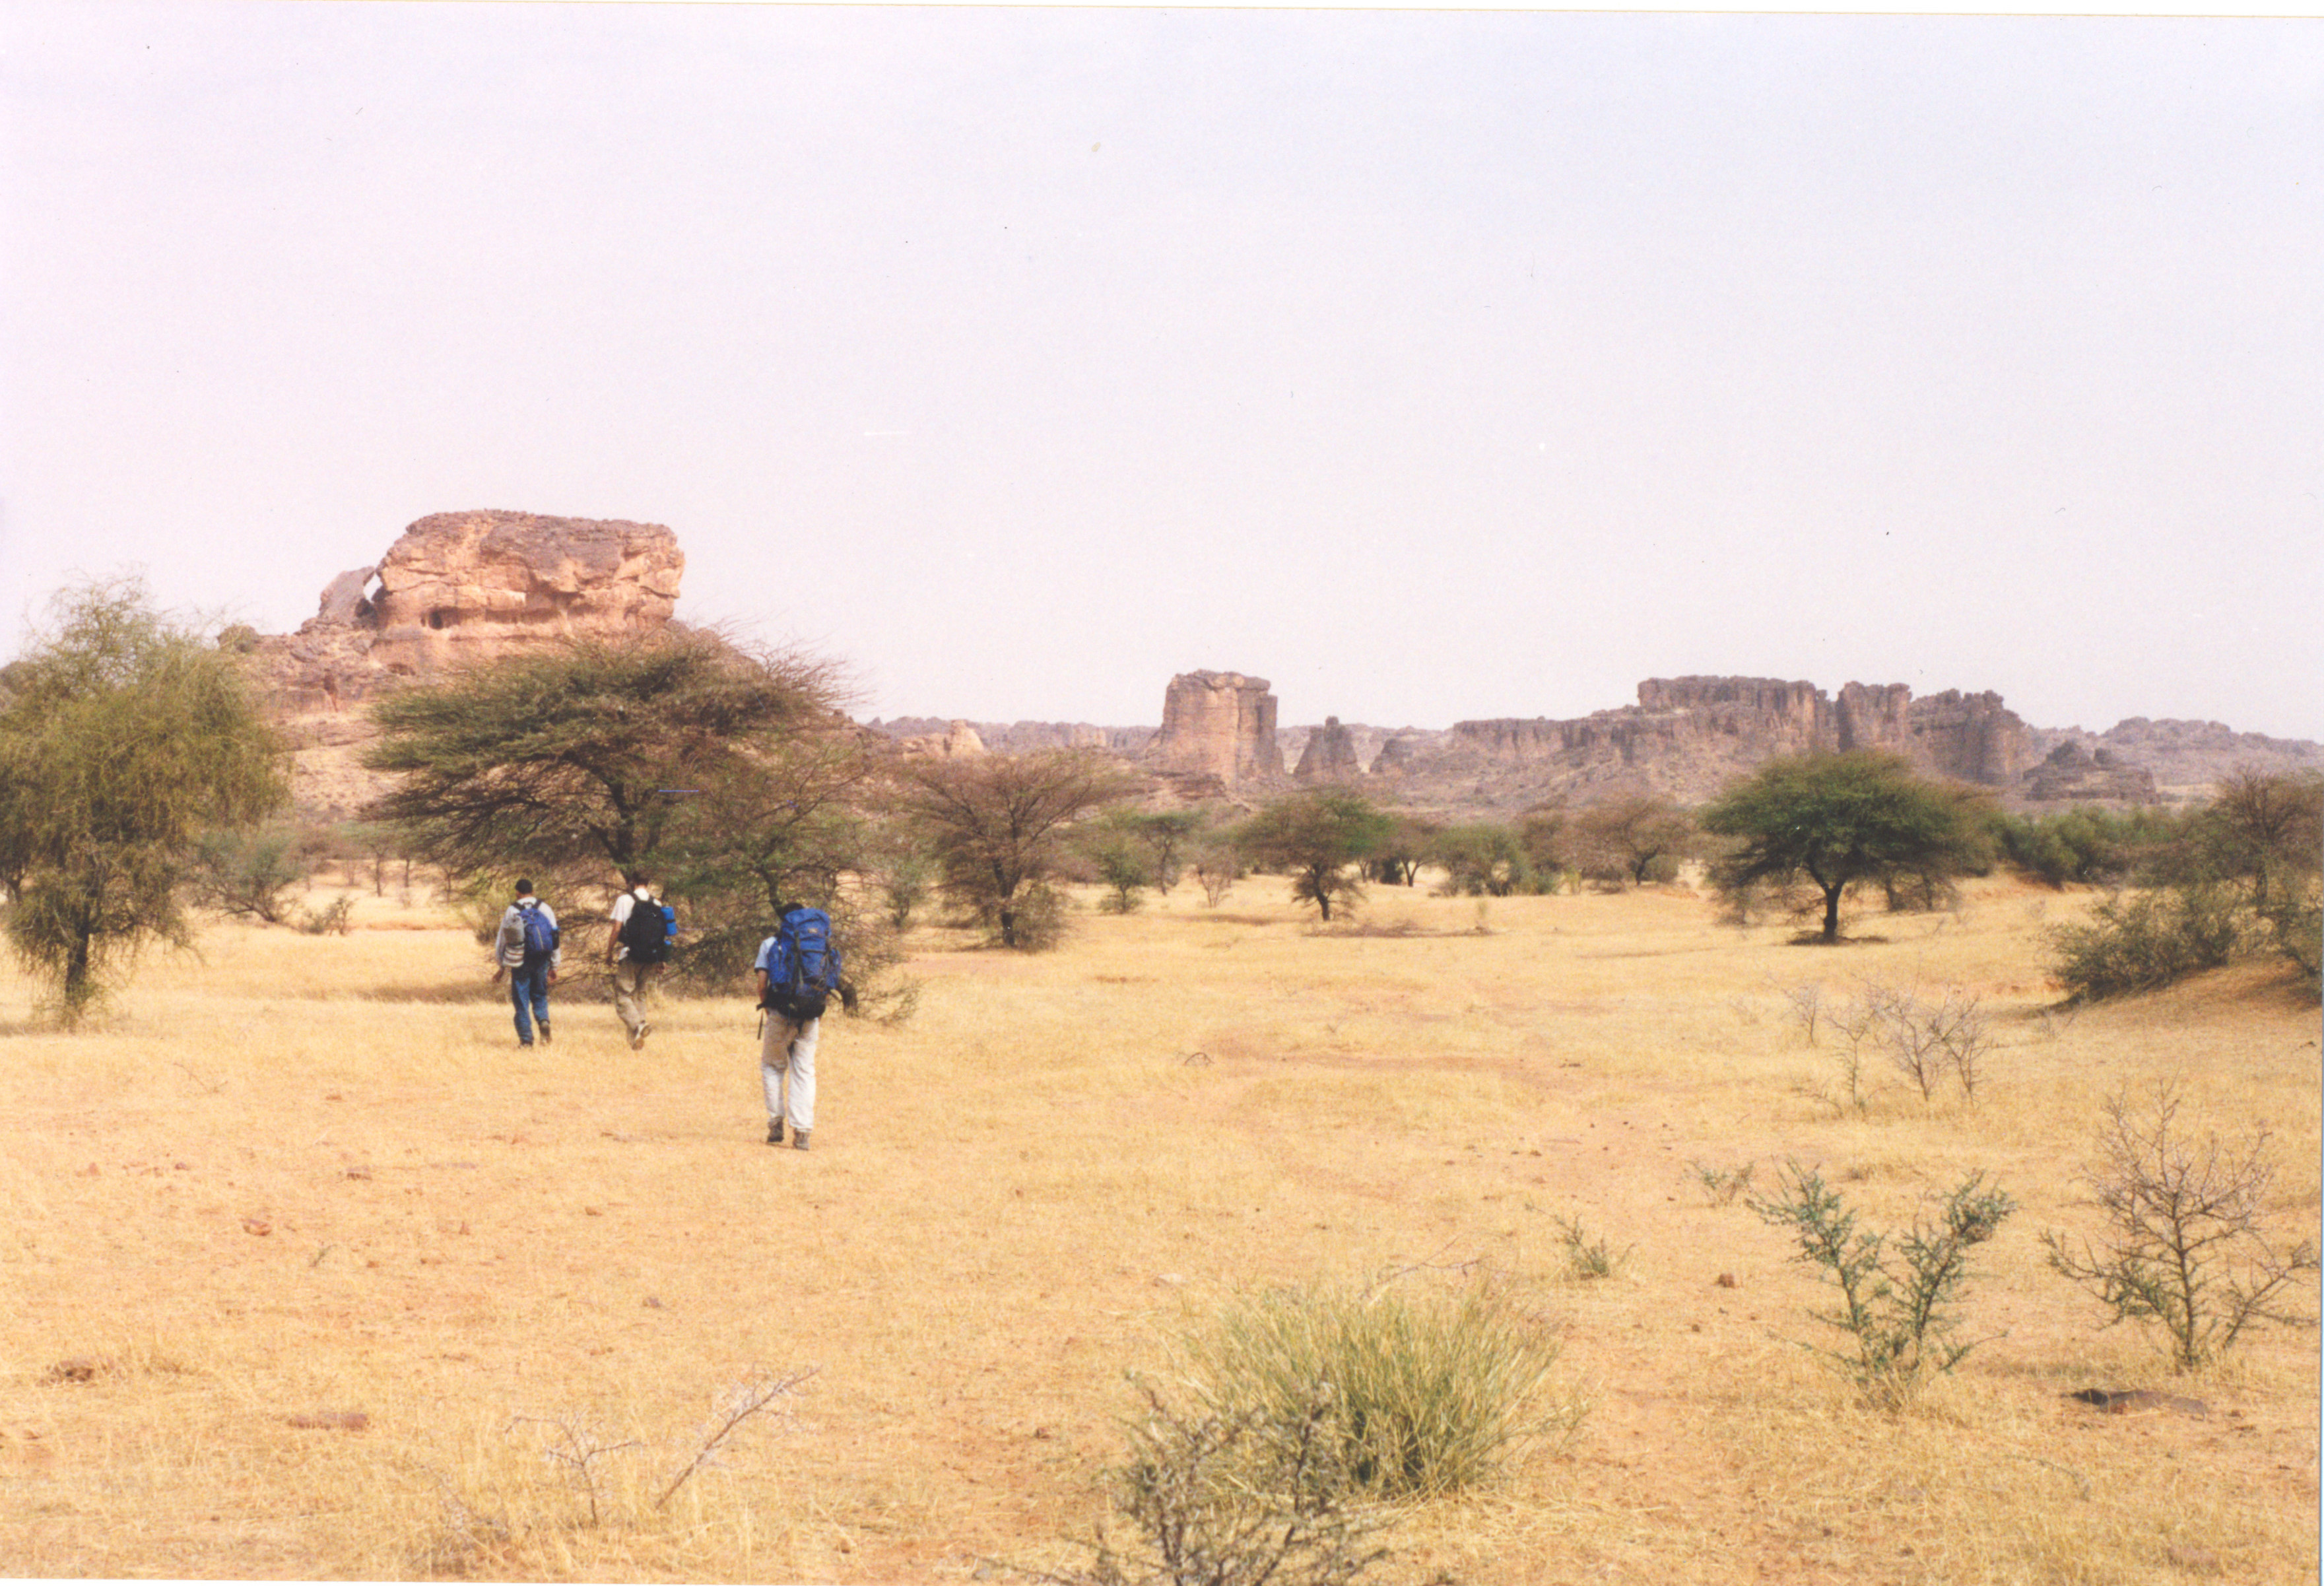 Three men with hiking backpacks walk away from us through the semi-arid landscape. Small trees populate the mid-distance. Rock massifs and plateaus rise up in the background.